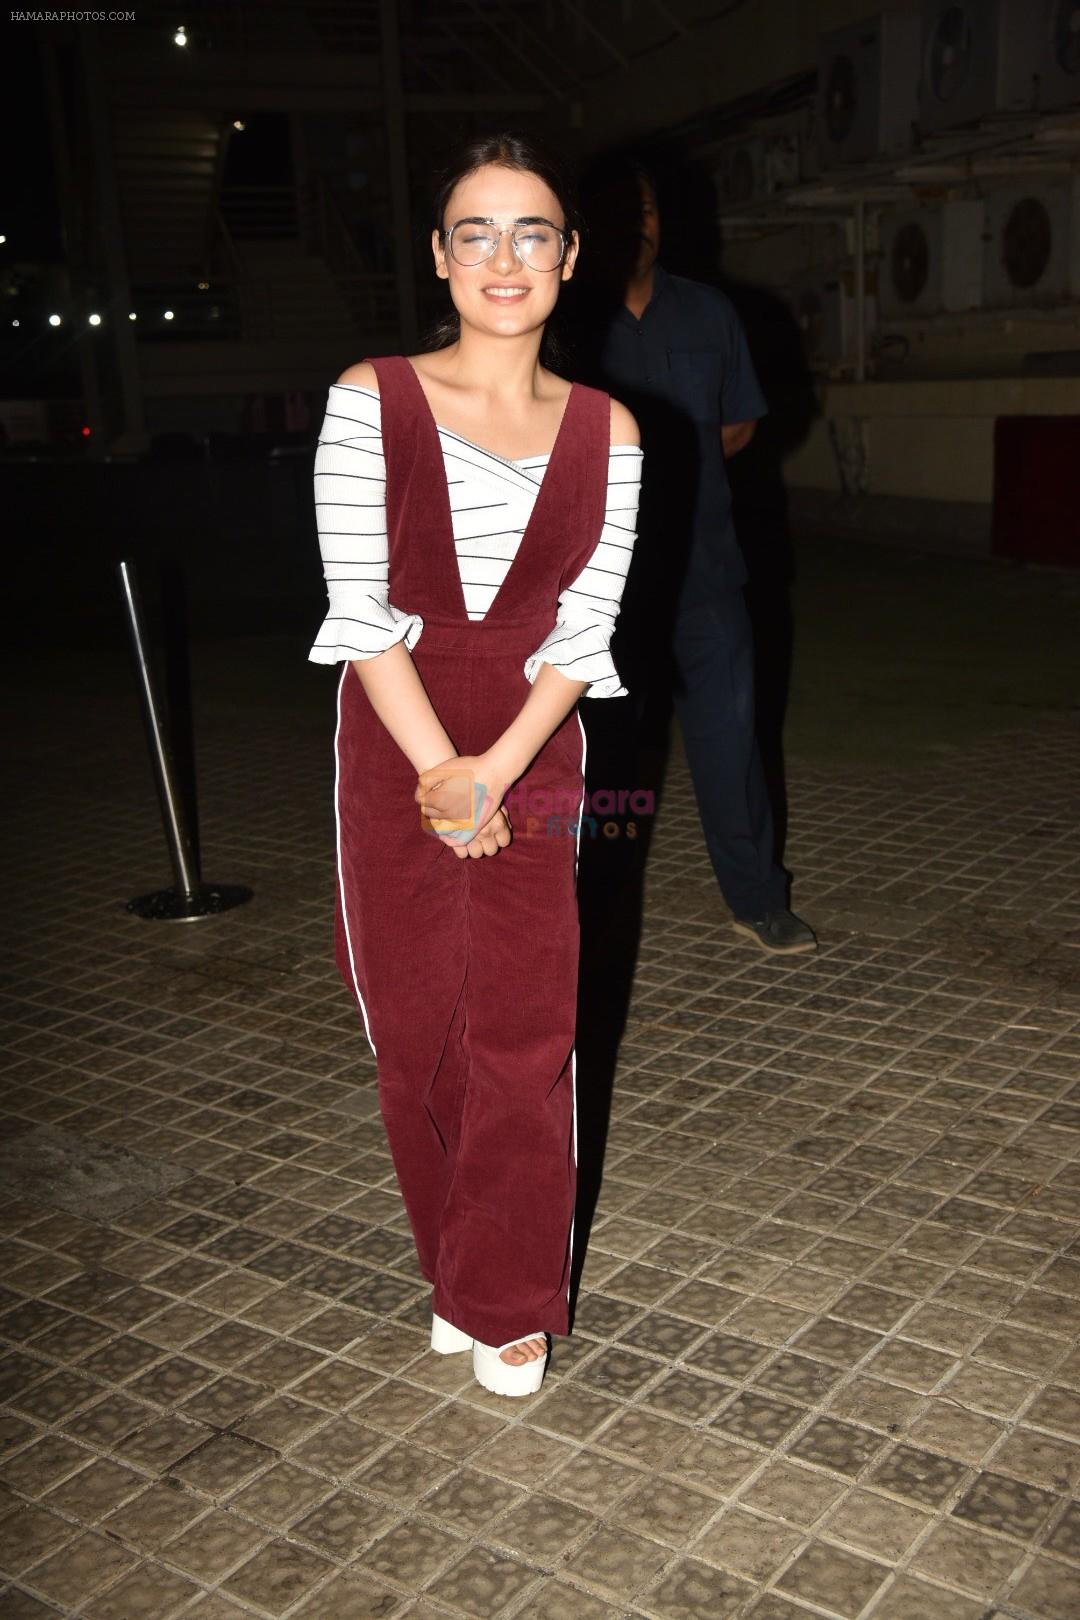 Radhika Madan at the Screening of movie photograph on 13th March 2019